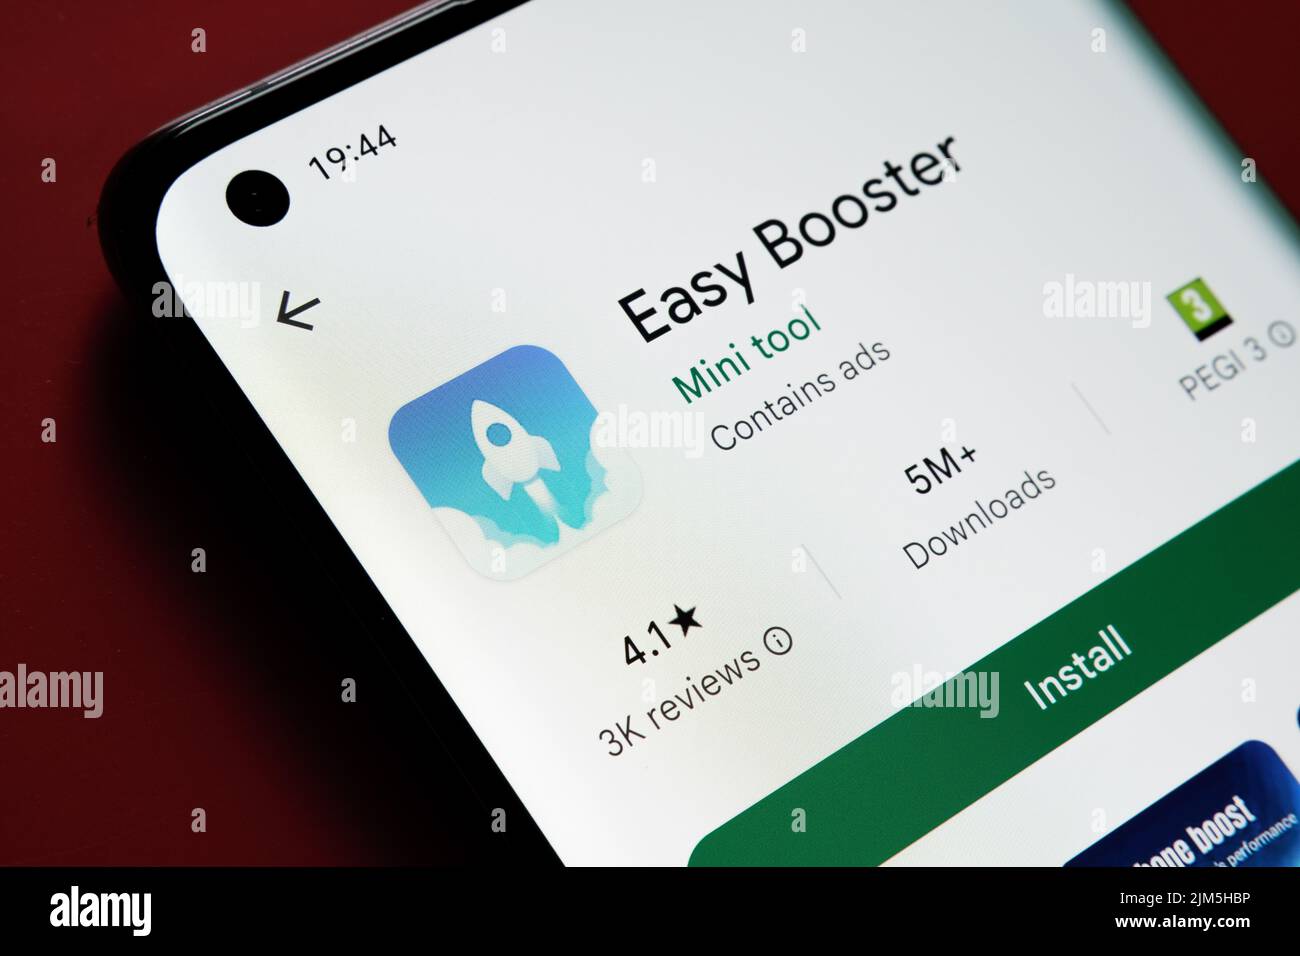 Easy booster app seen on the screen of smartphone. August 2, 2022. Stock Photo